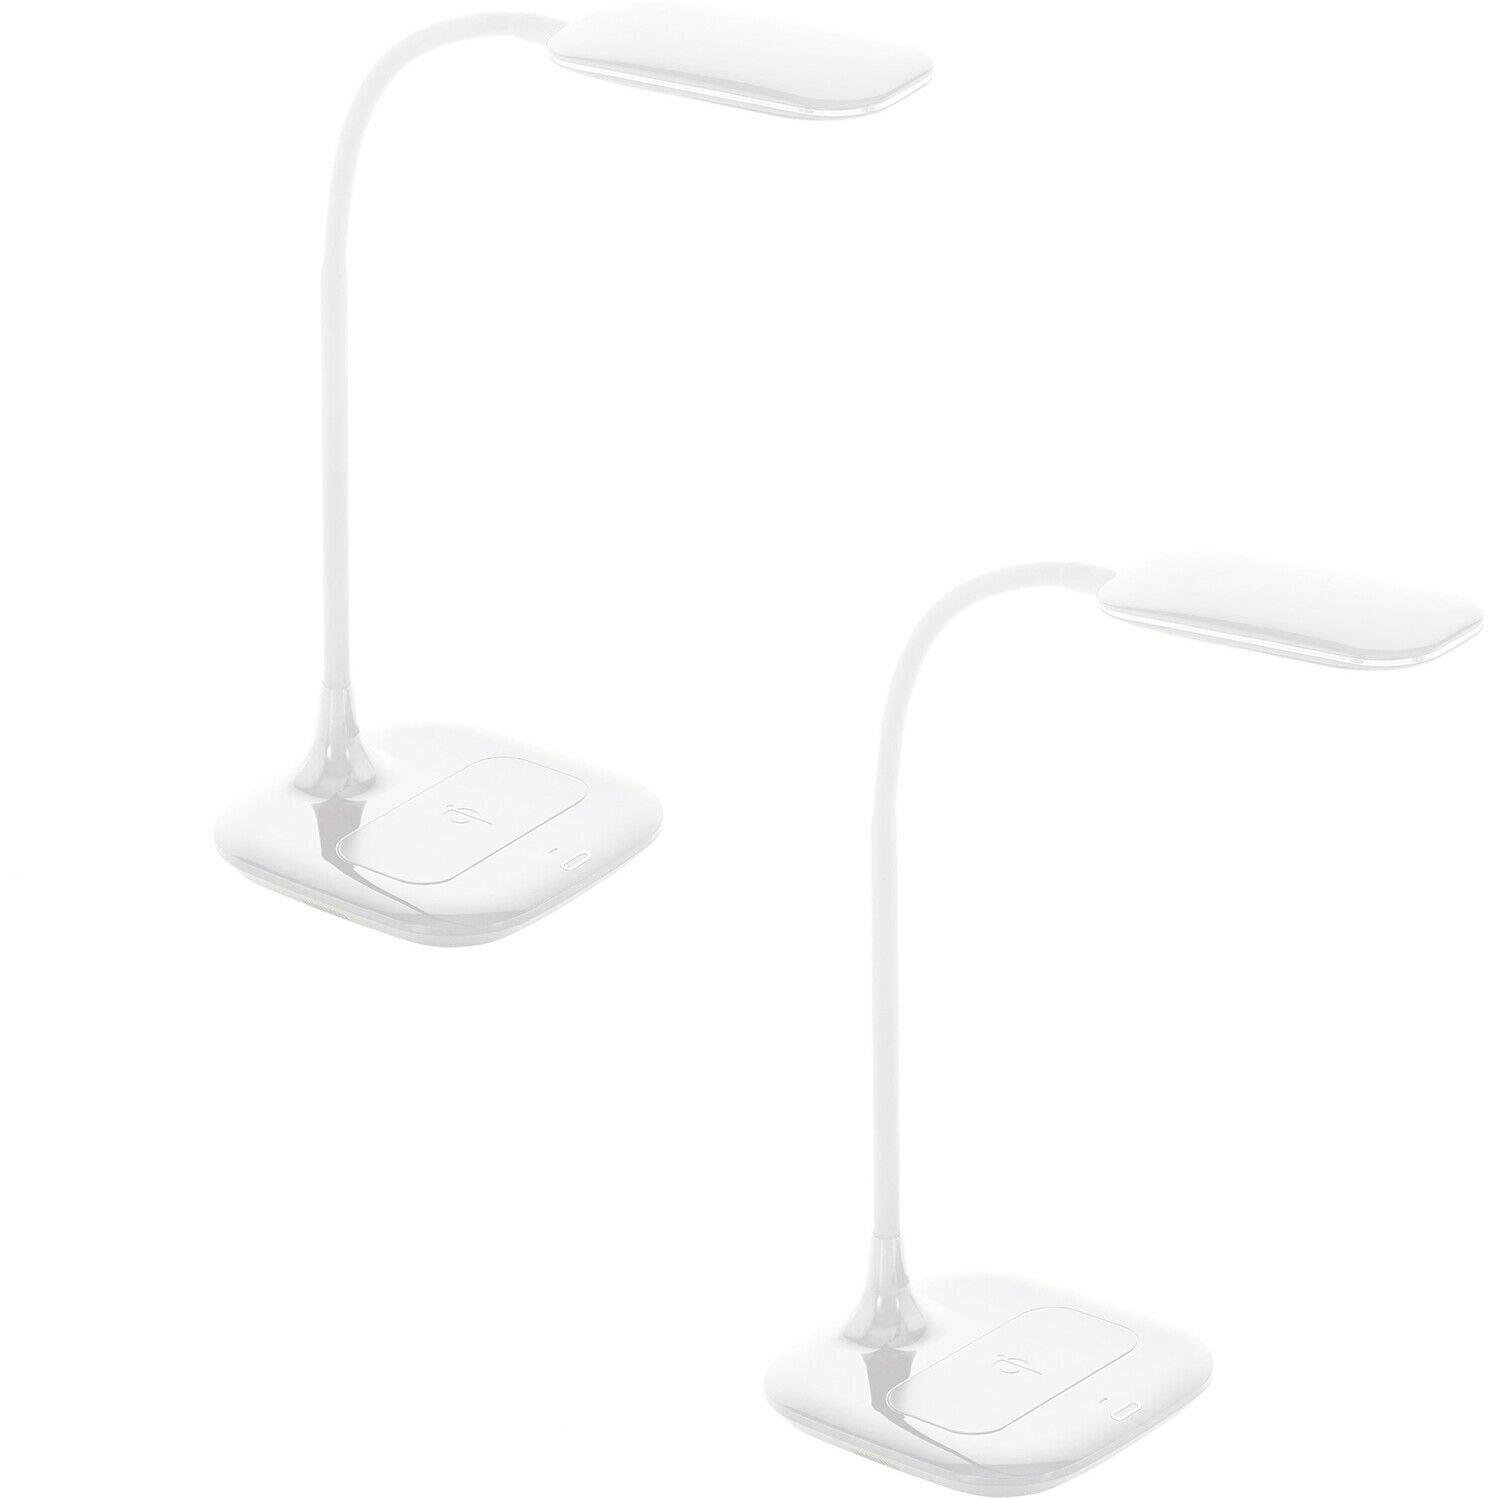 2 PACK Table Desk Lamp Colour White Touch On/Off Dimming Bulb LED 3.4W Included